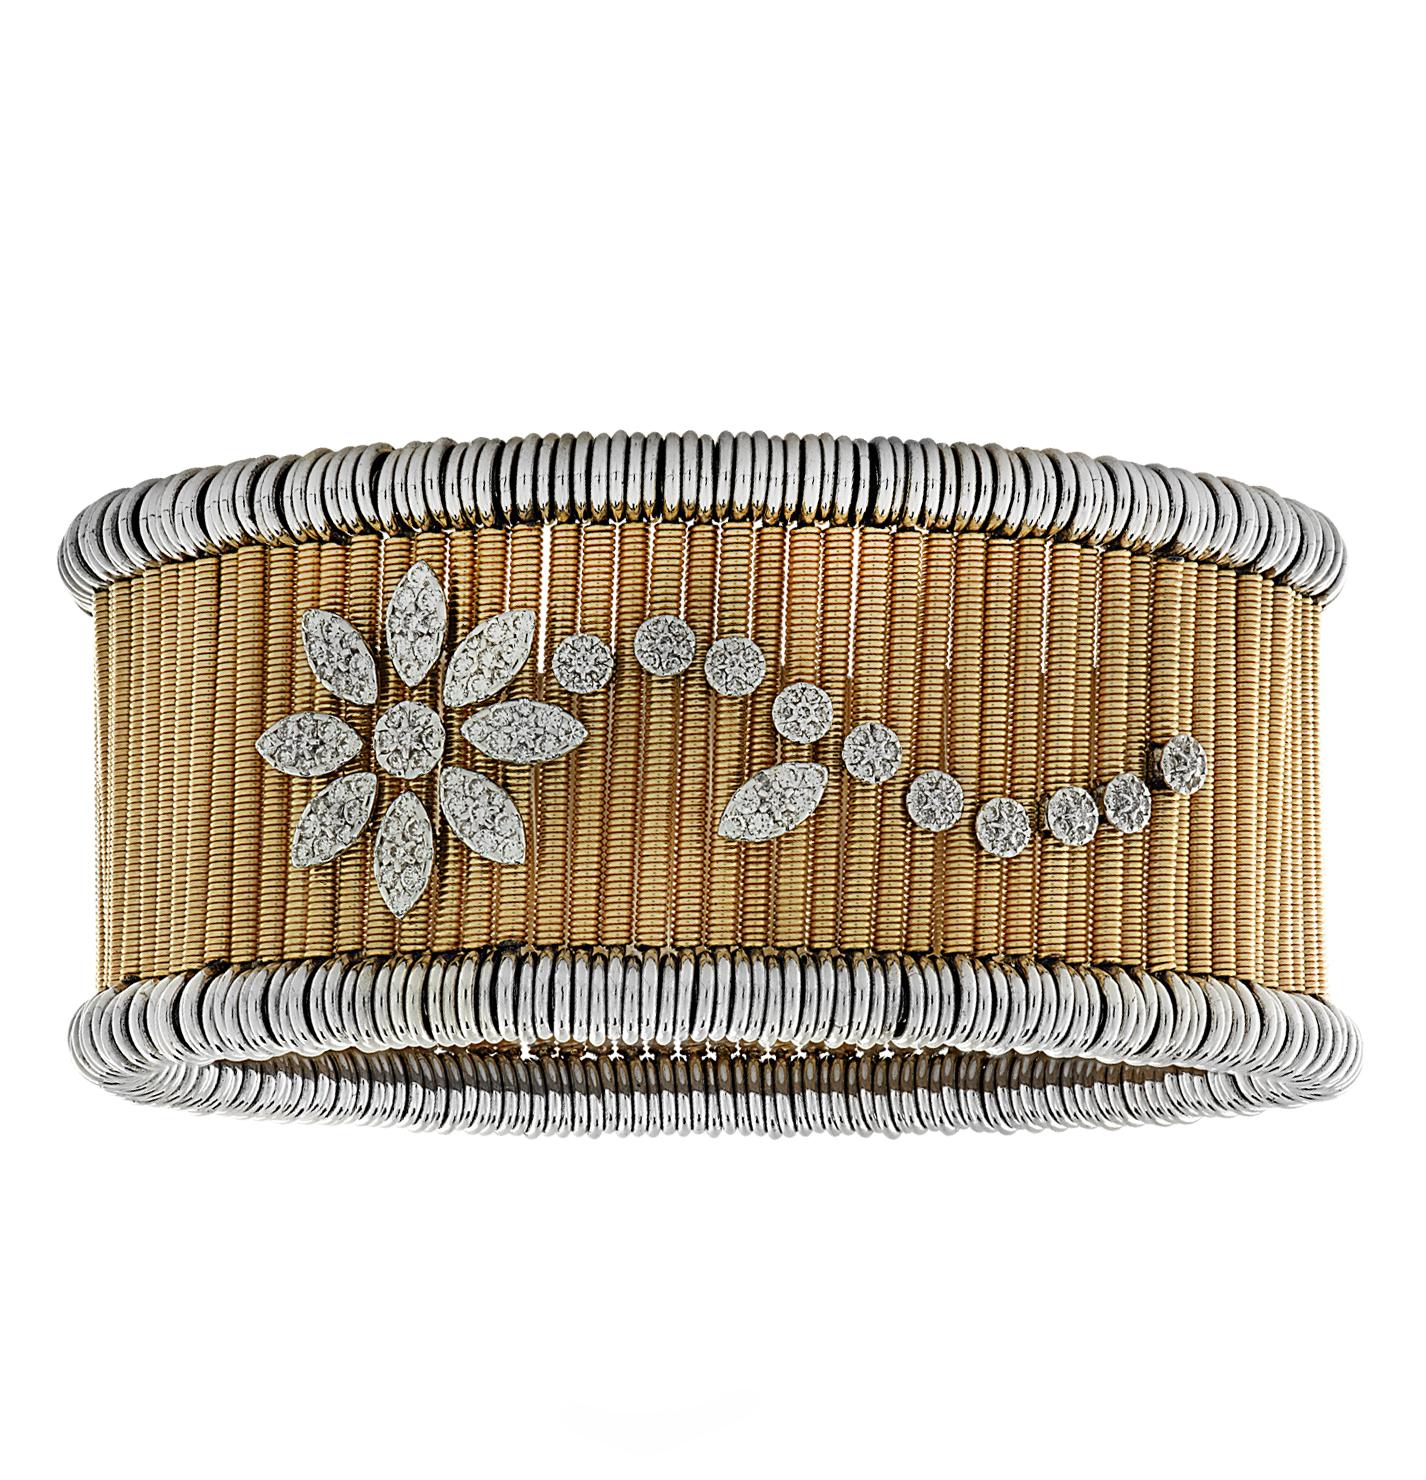 Jarretiere expandable bangle bracelet expertly crafted in Italy in 18 karat yellow gold and white gold, featuring 158 round brilliant cut diamonds weighing approximately .79 carats total. Yellow gold coils trimmed with white gold coils, are adorned